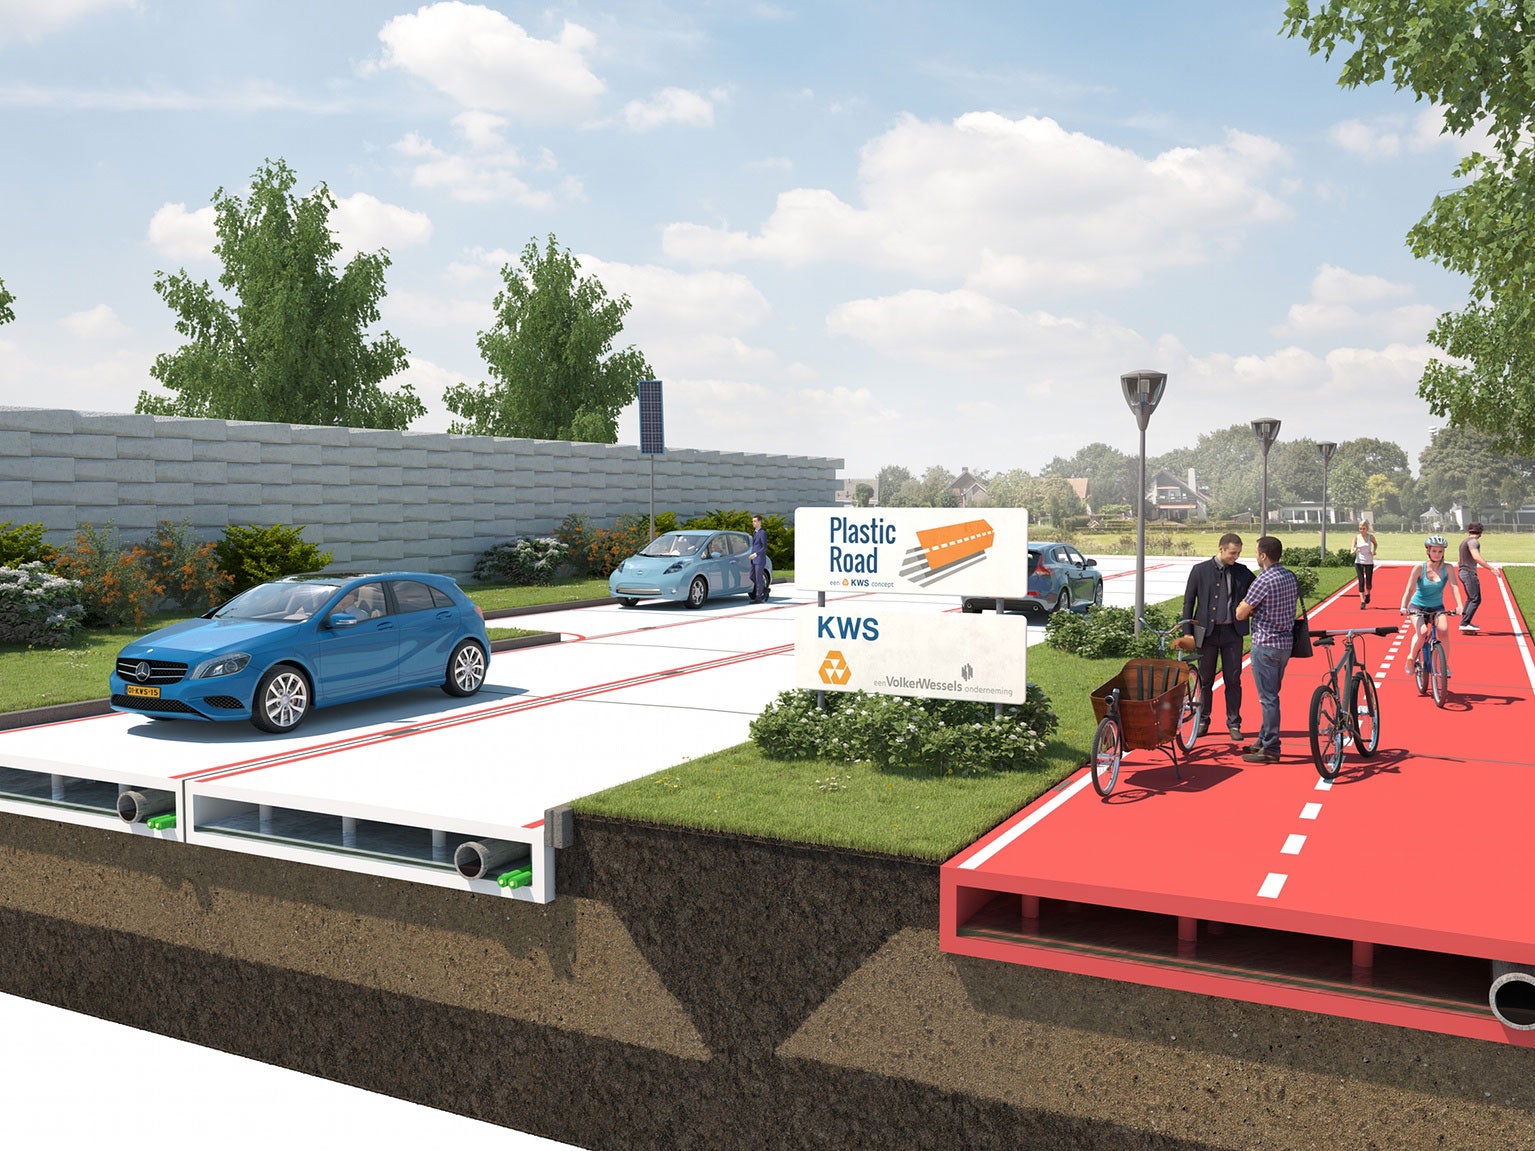 Construction firm VolkerWessels revealed plans on Friday for a road surface made entirely from recycled plastic